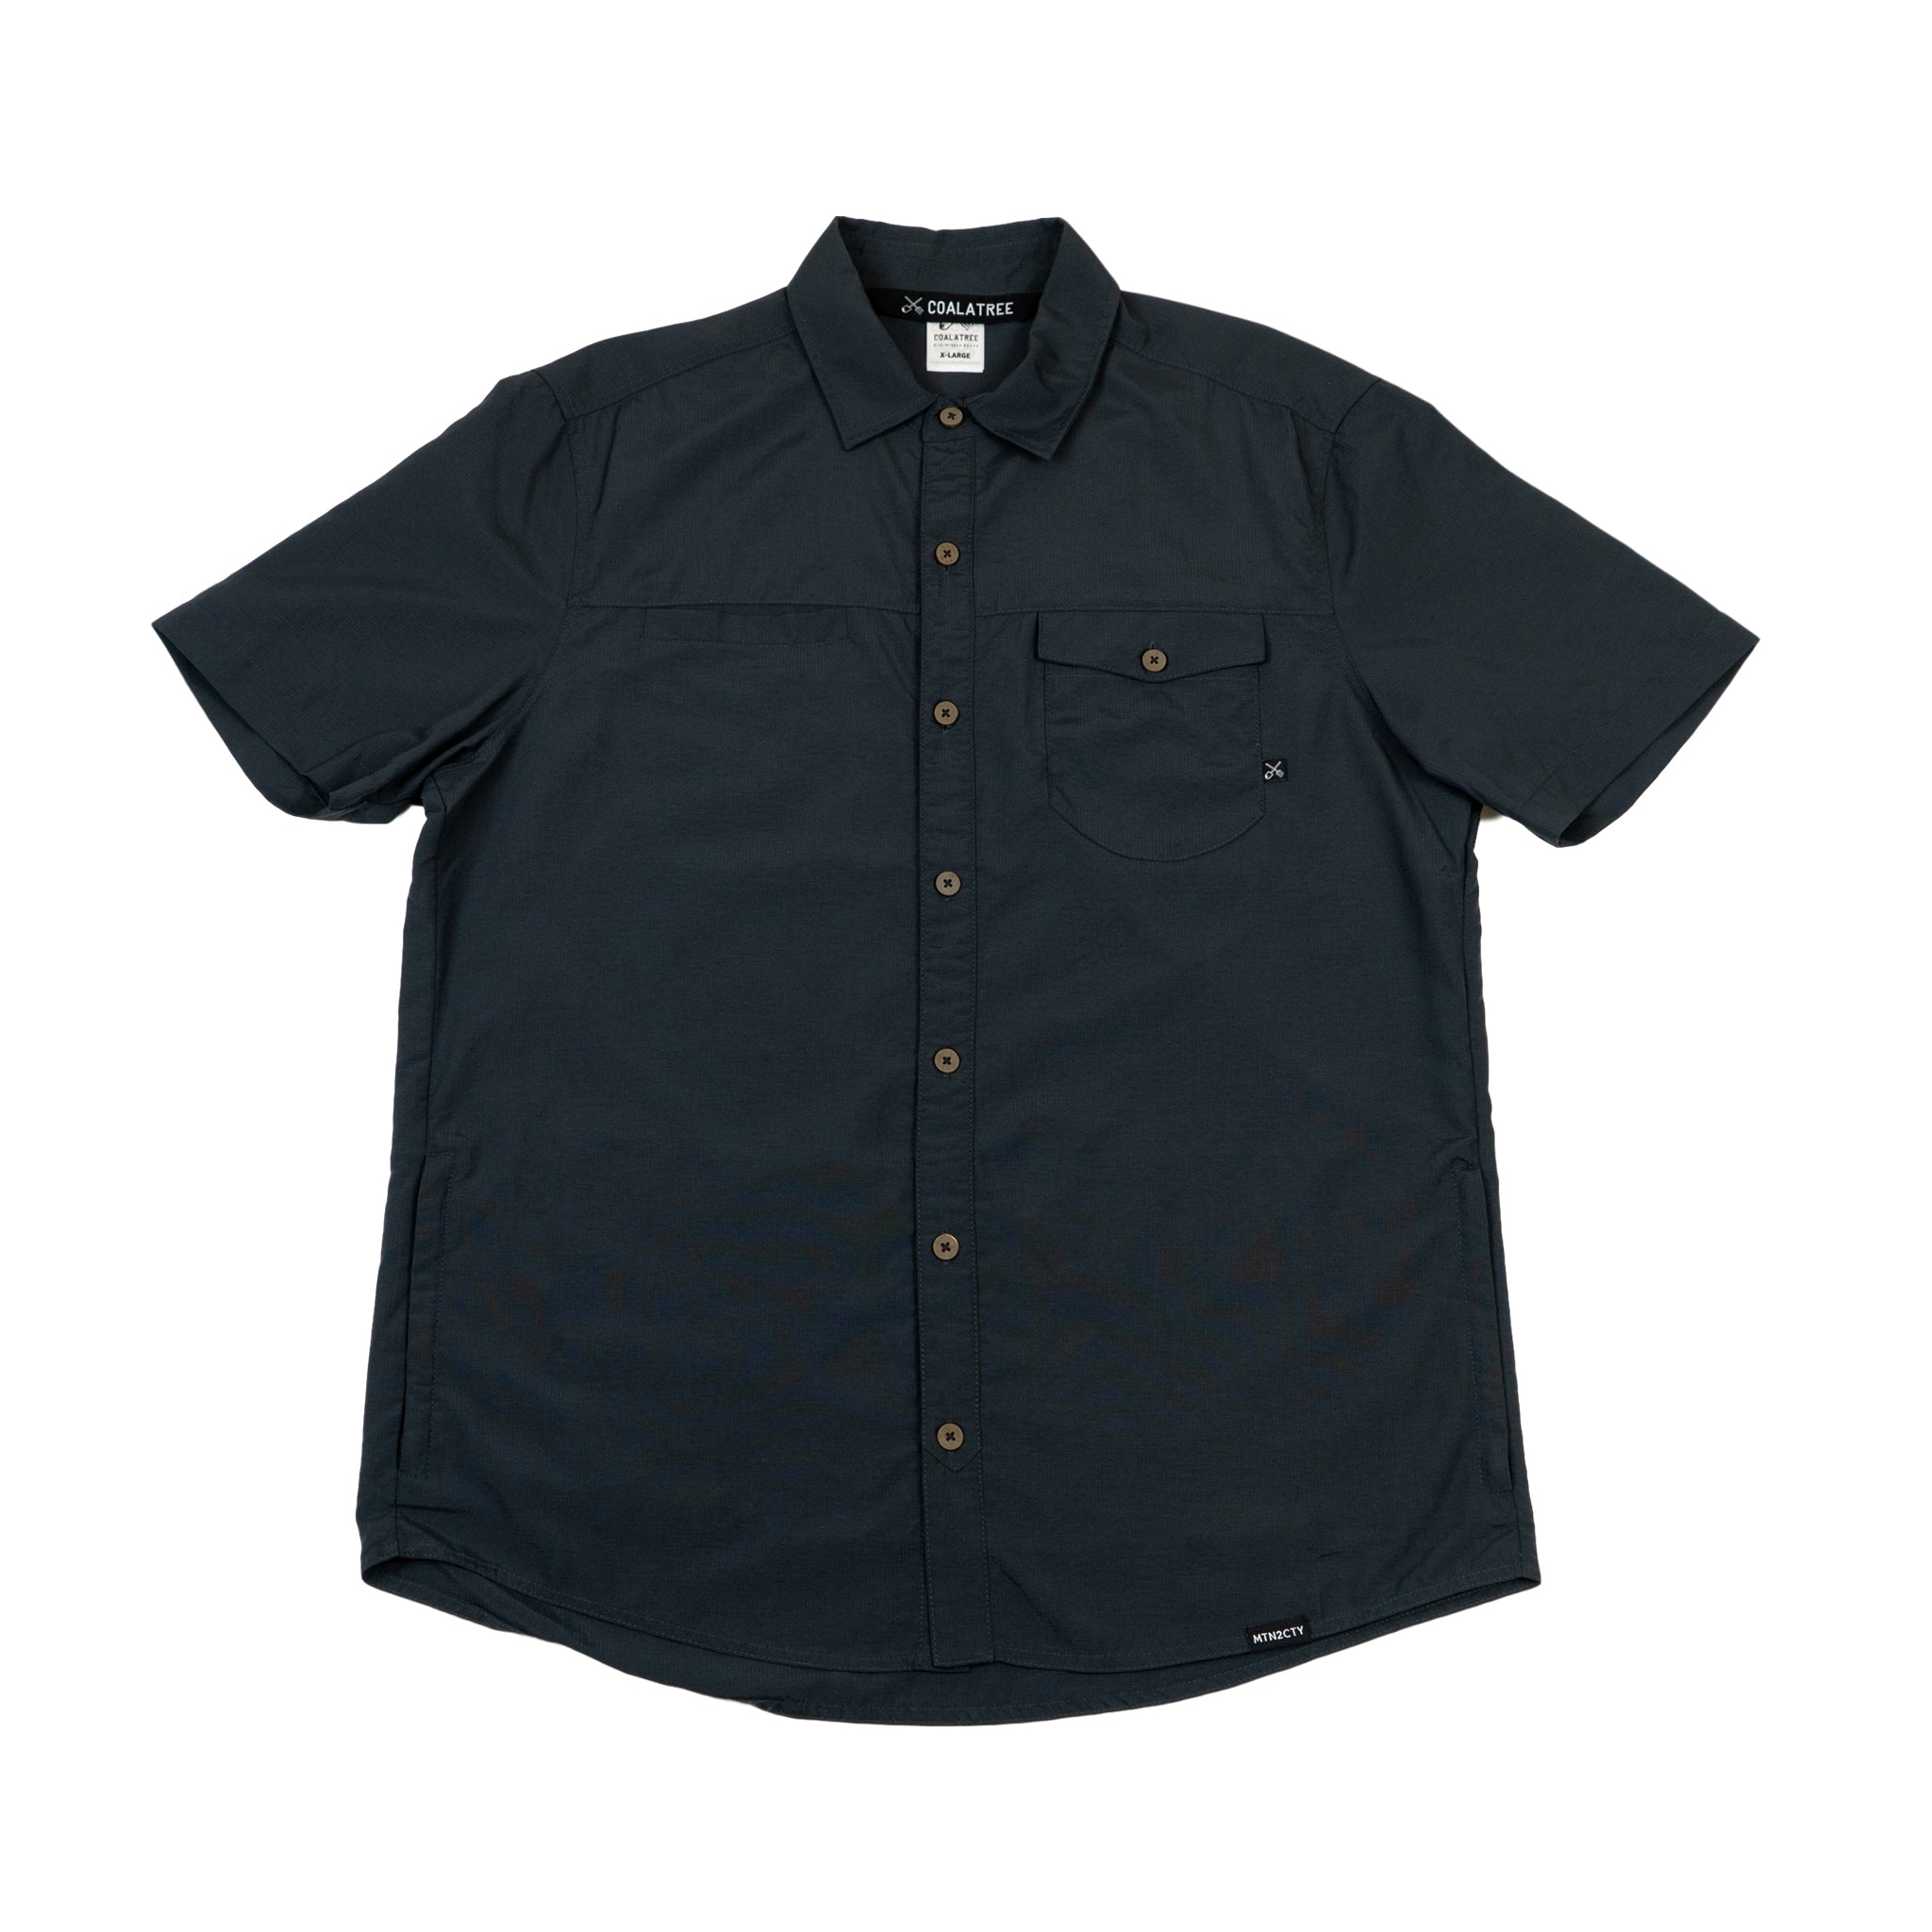 MENS SWITCHBACK SHIRT: MADE FROM RECYCLED COFFEE GROUNDS